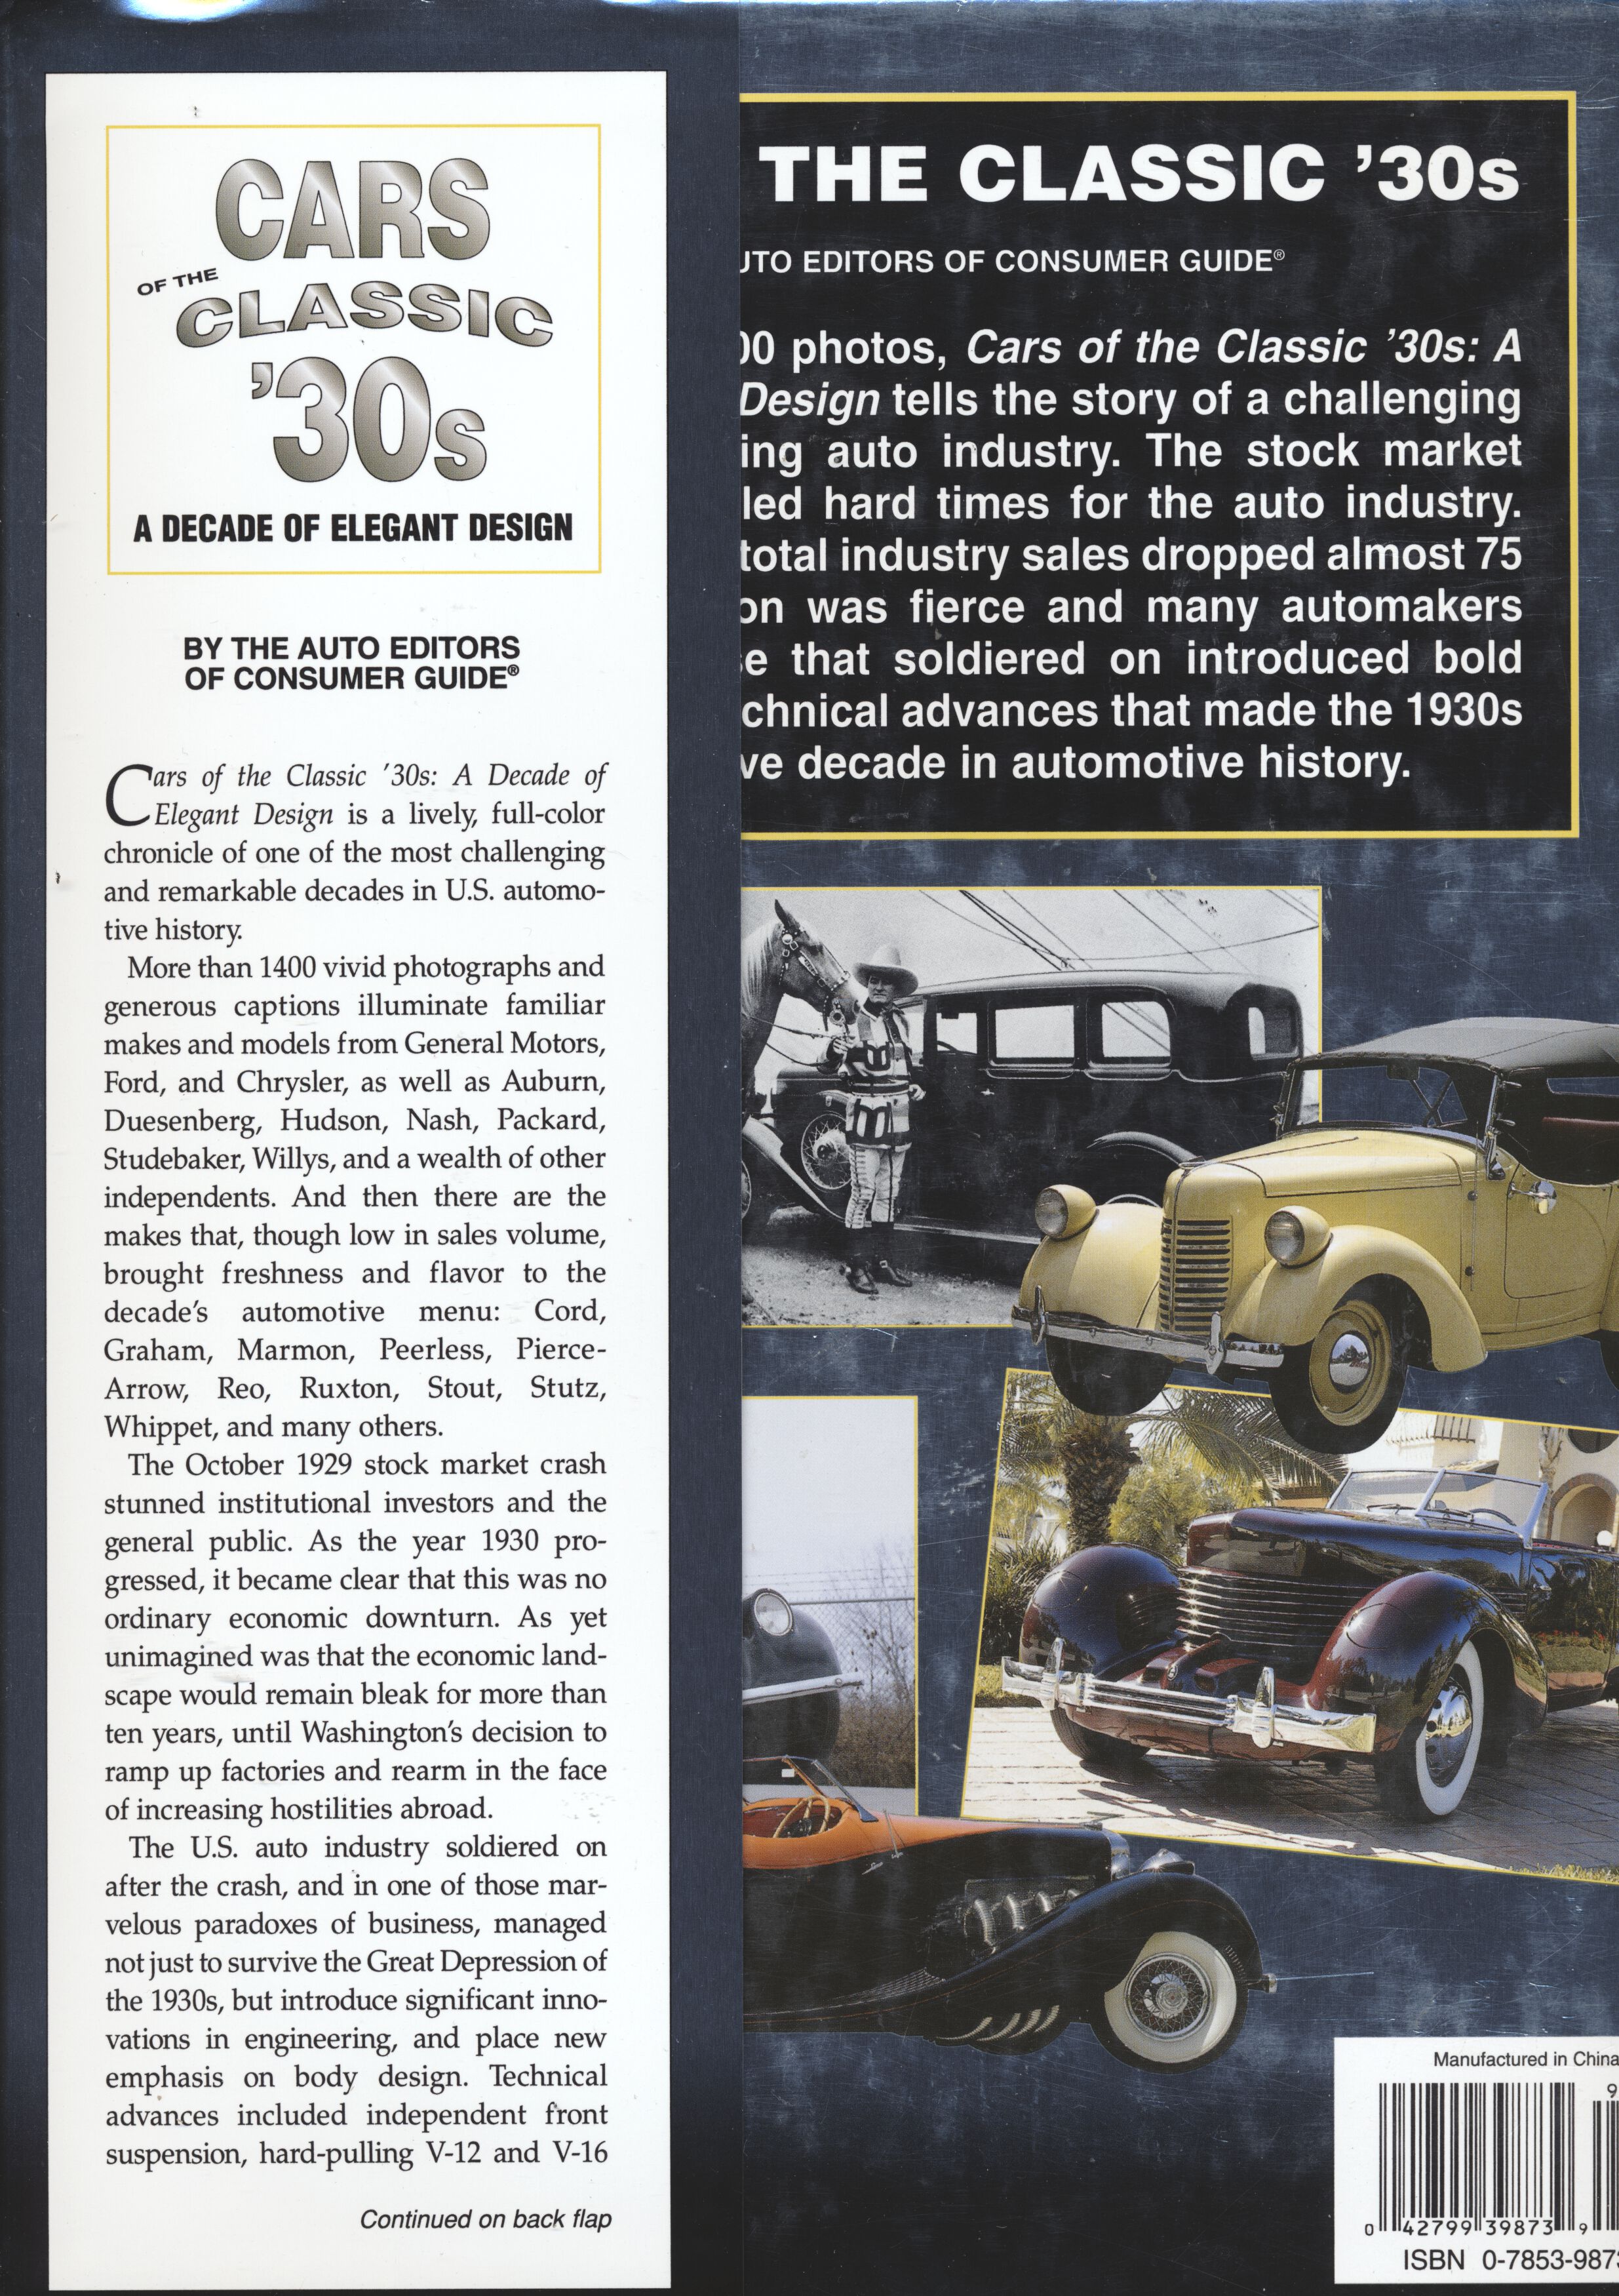 Cars of the Classic '30's 